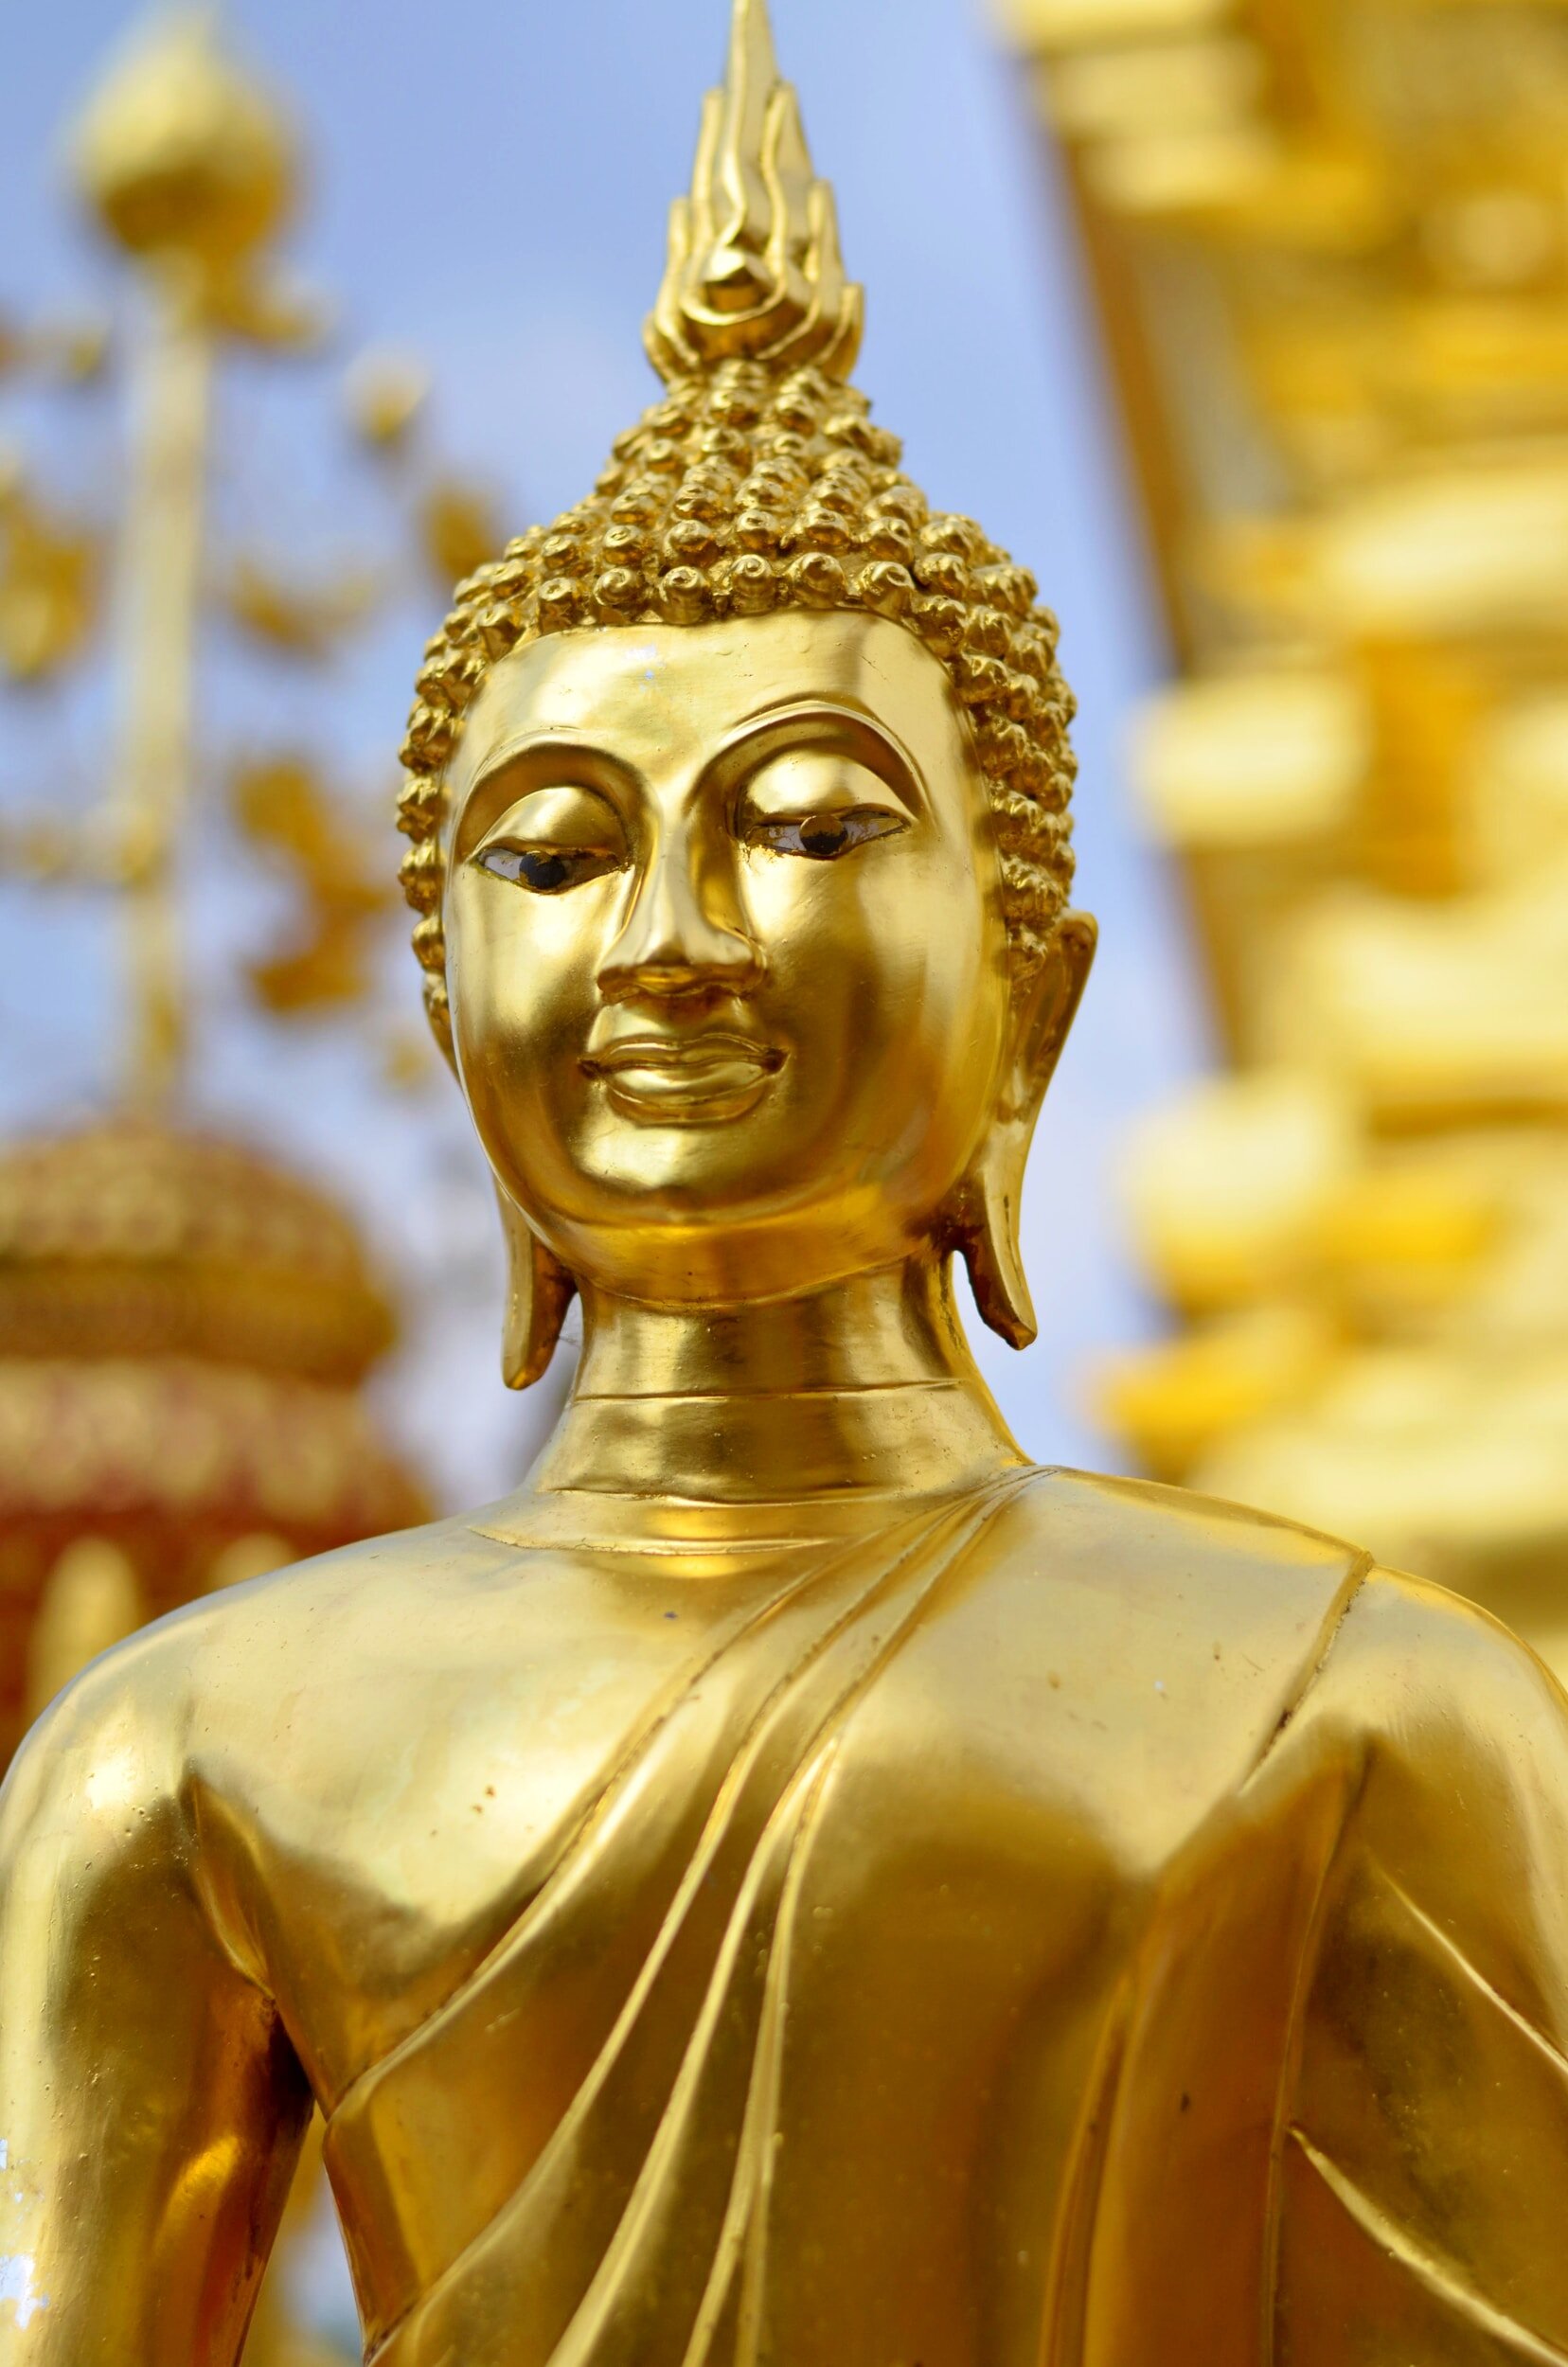 Buddha is Thailand's most iconic religious figure